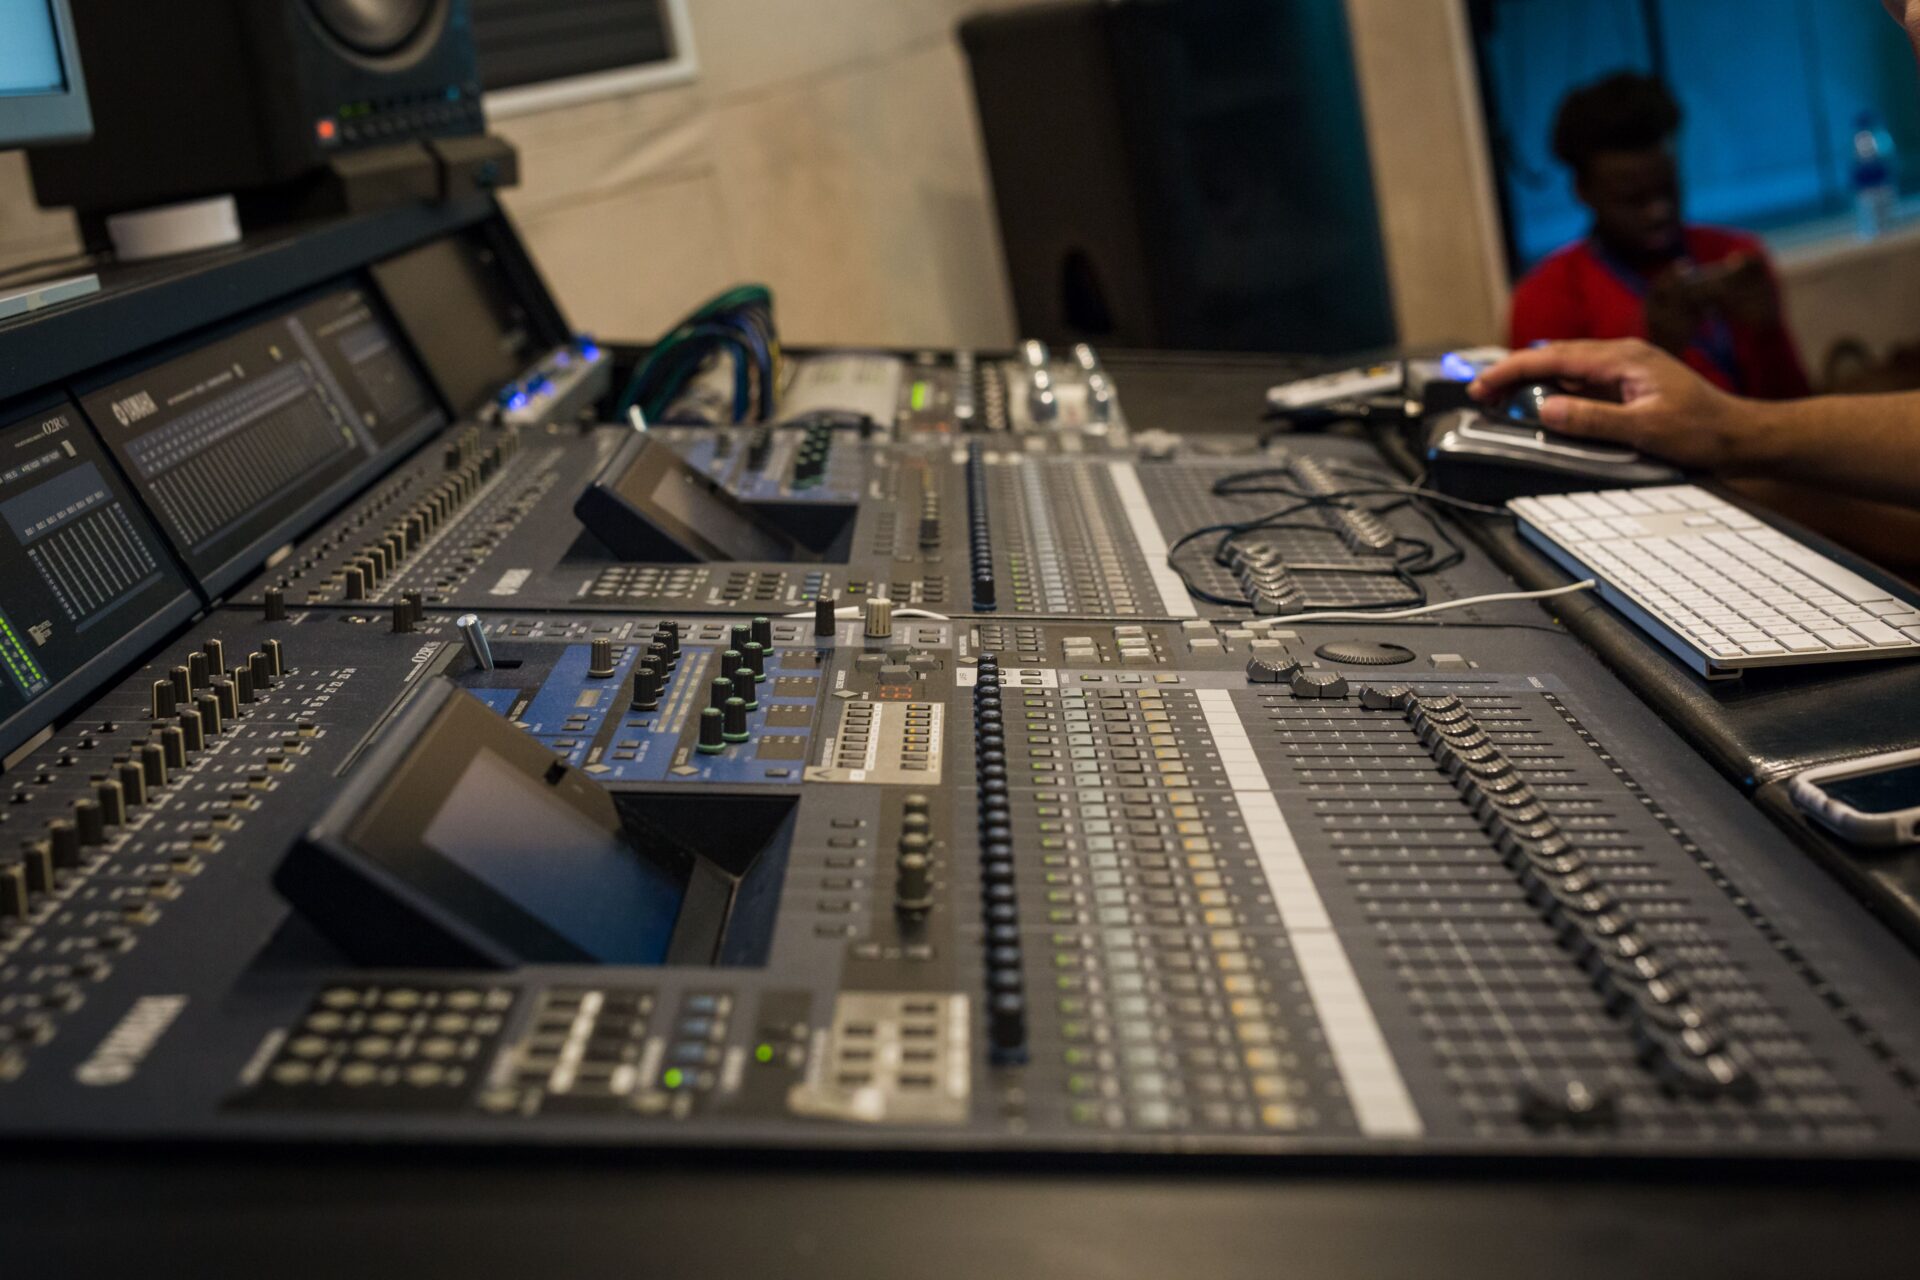 A person is working on some sound board